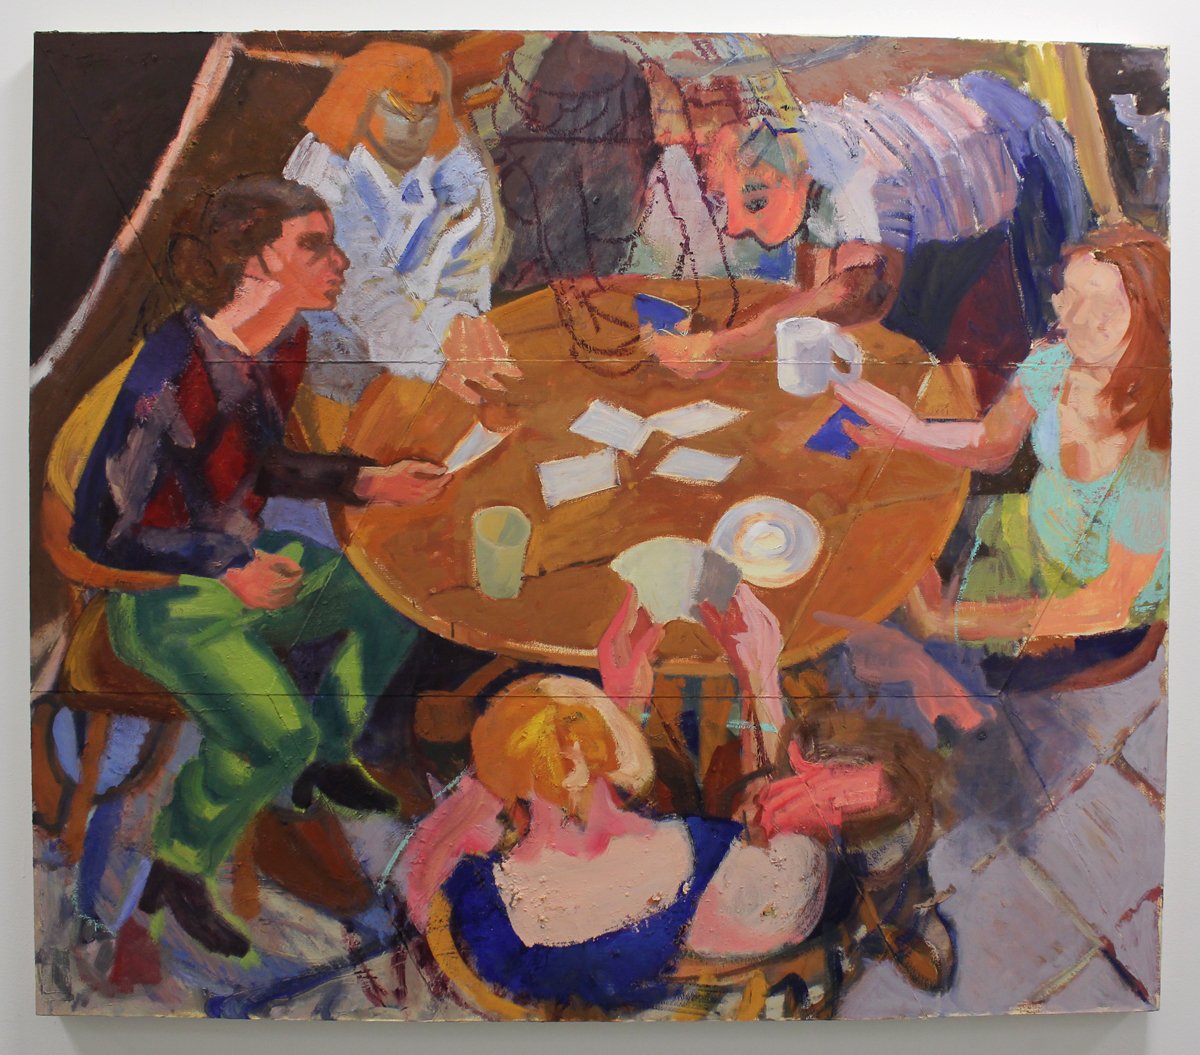  Card Players 45 in x 52 in oil on paper on canvas 2014 